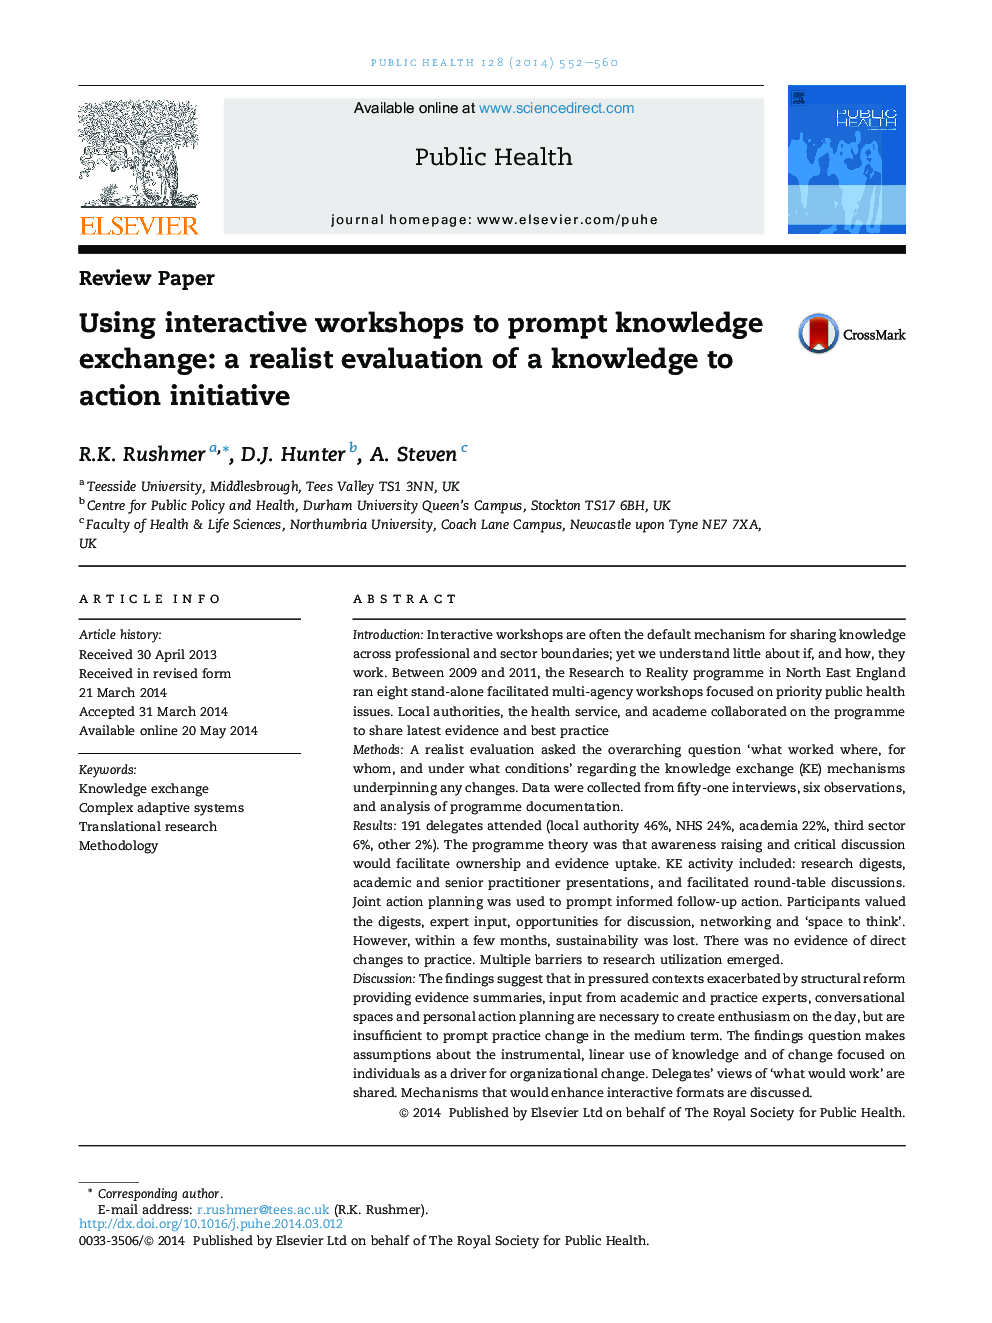 Using interactive workshops to prompt knowledge exchange: a realist evaluation of a knowledge to action initiative